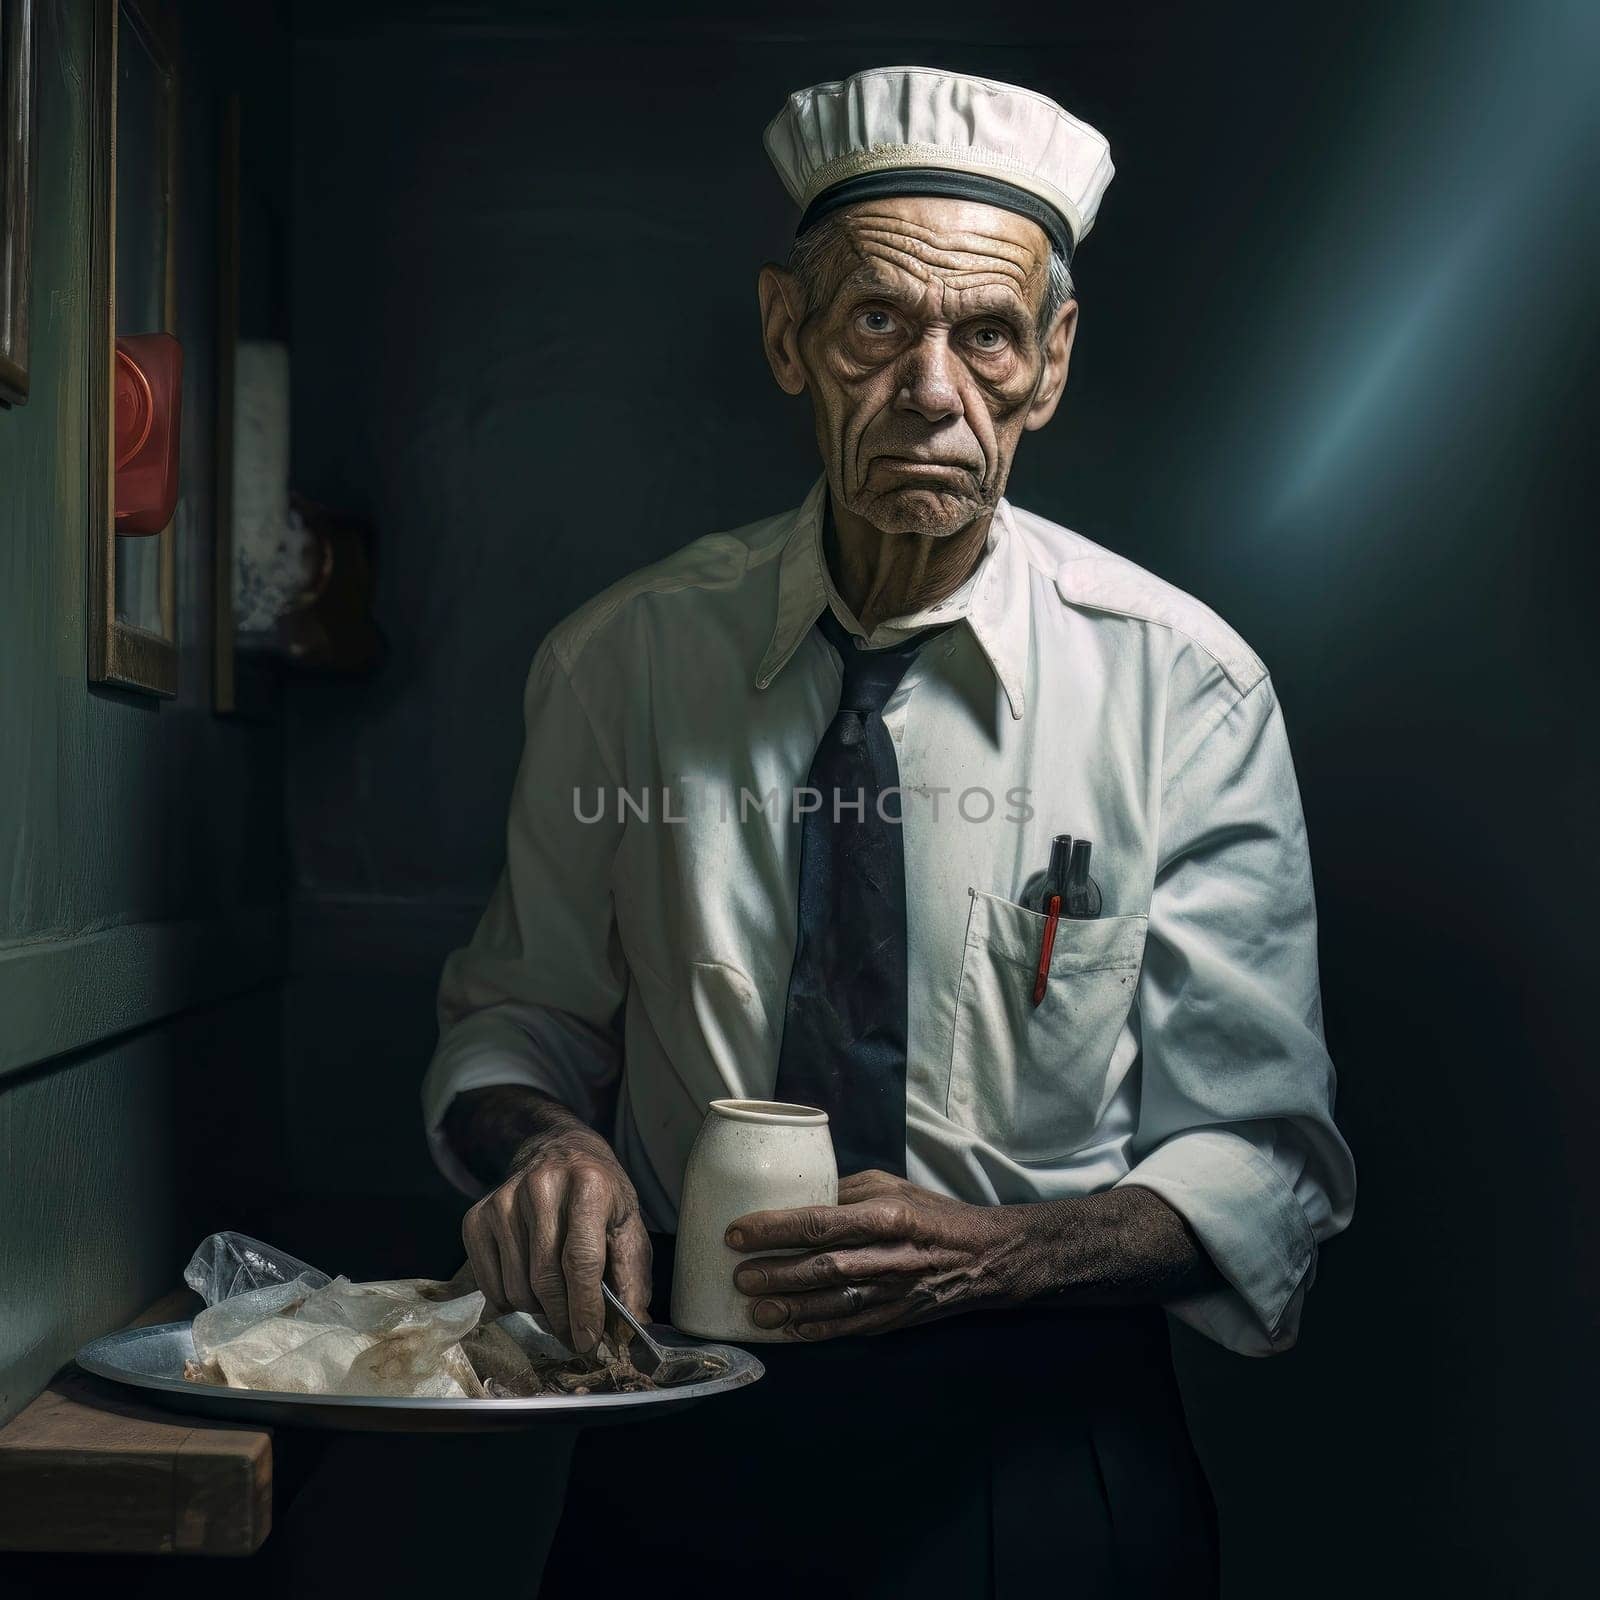 Weary Old Chef by pippocarlot